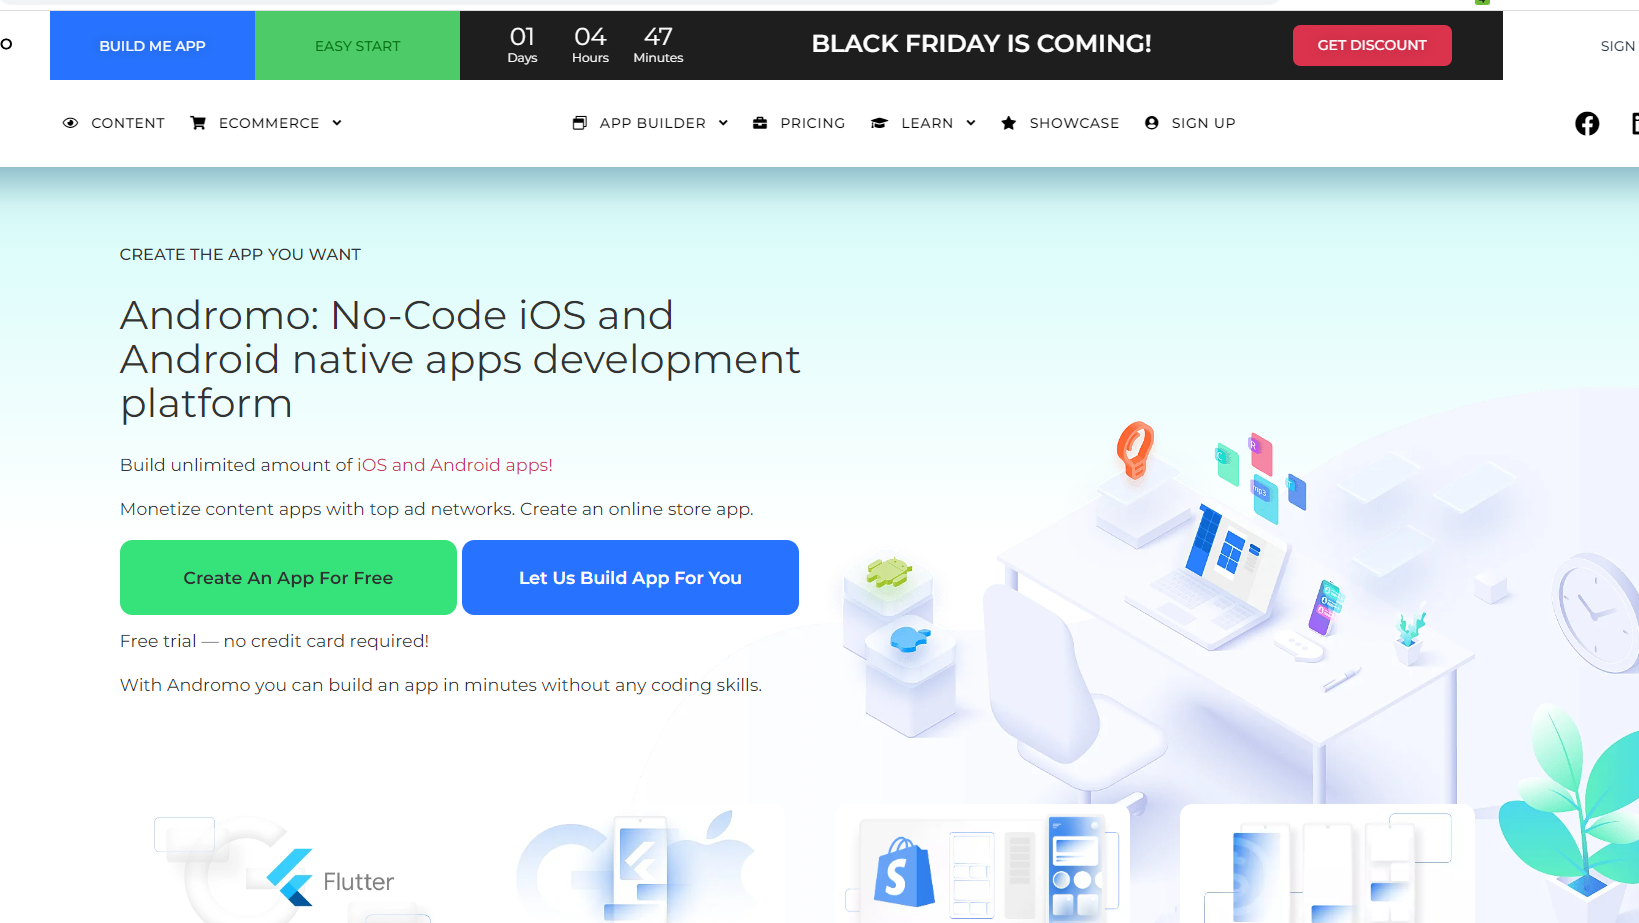 Andromo: No-Code iOS and Android native apps development platform